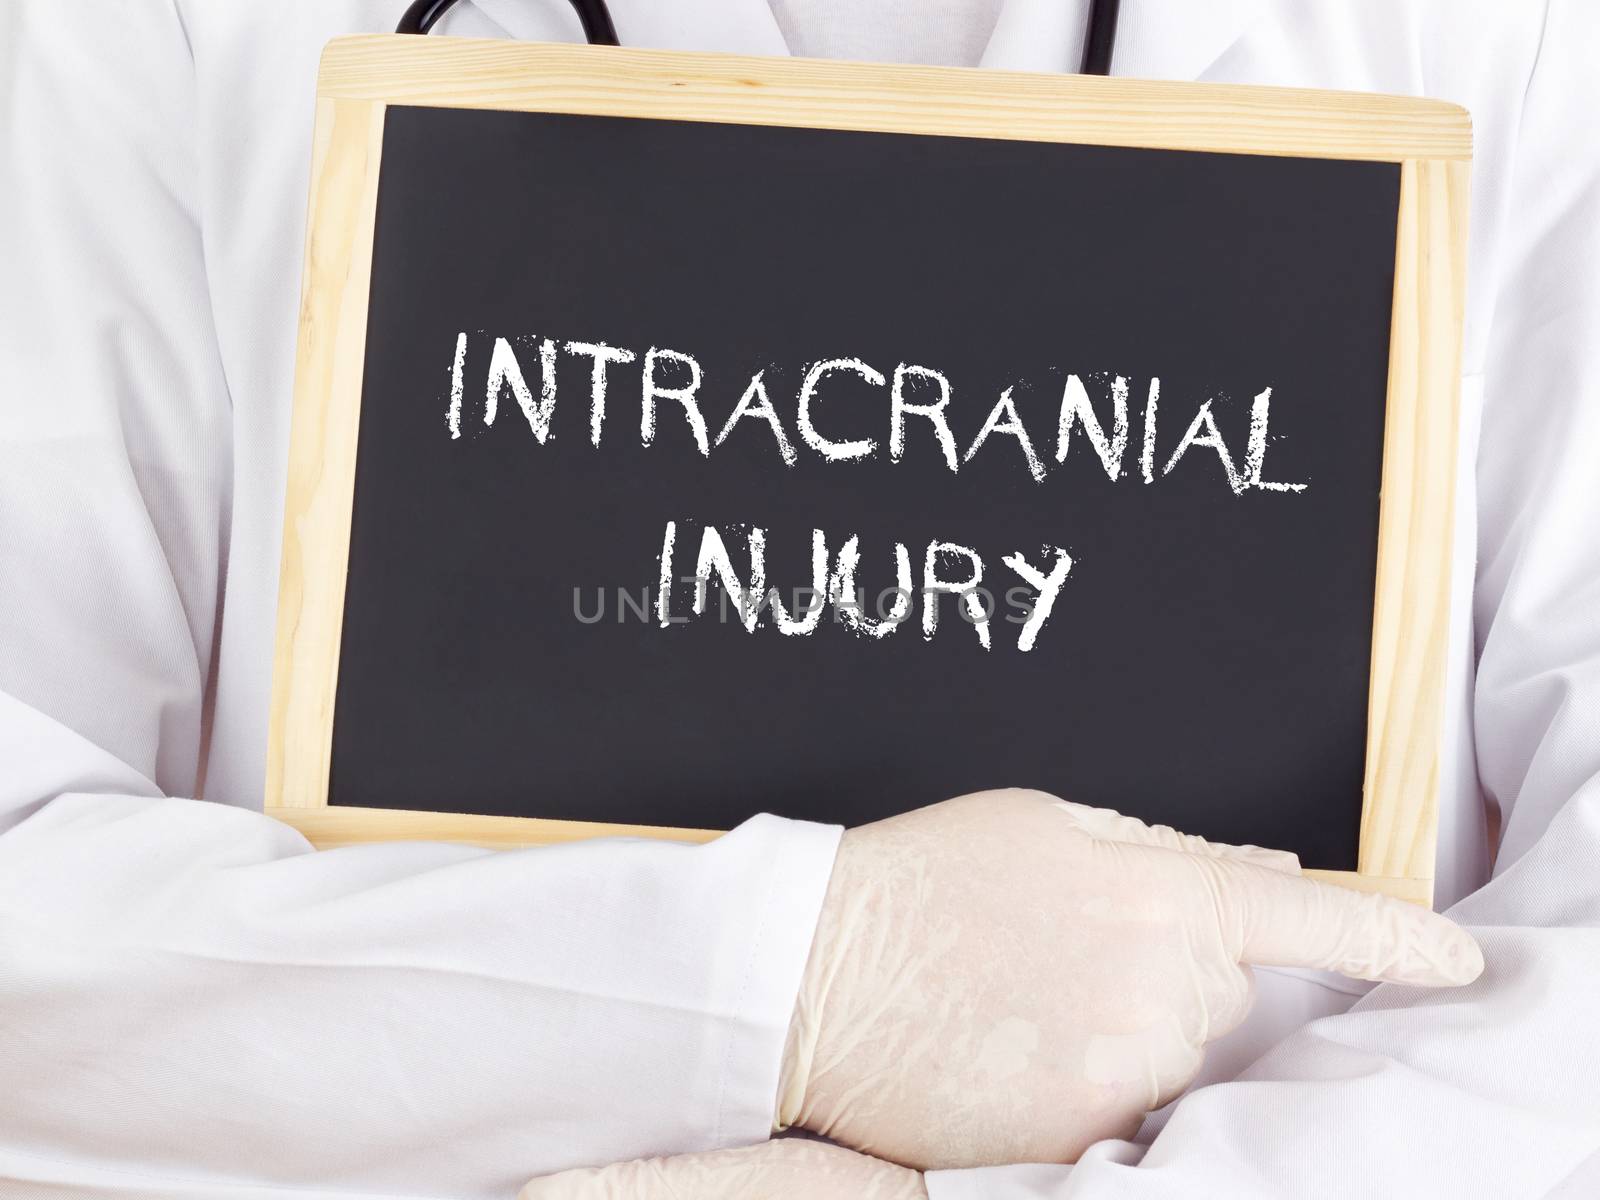 Doctor shows information on blackboard: intracranial injury by gwolters